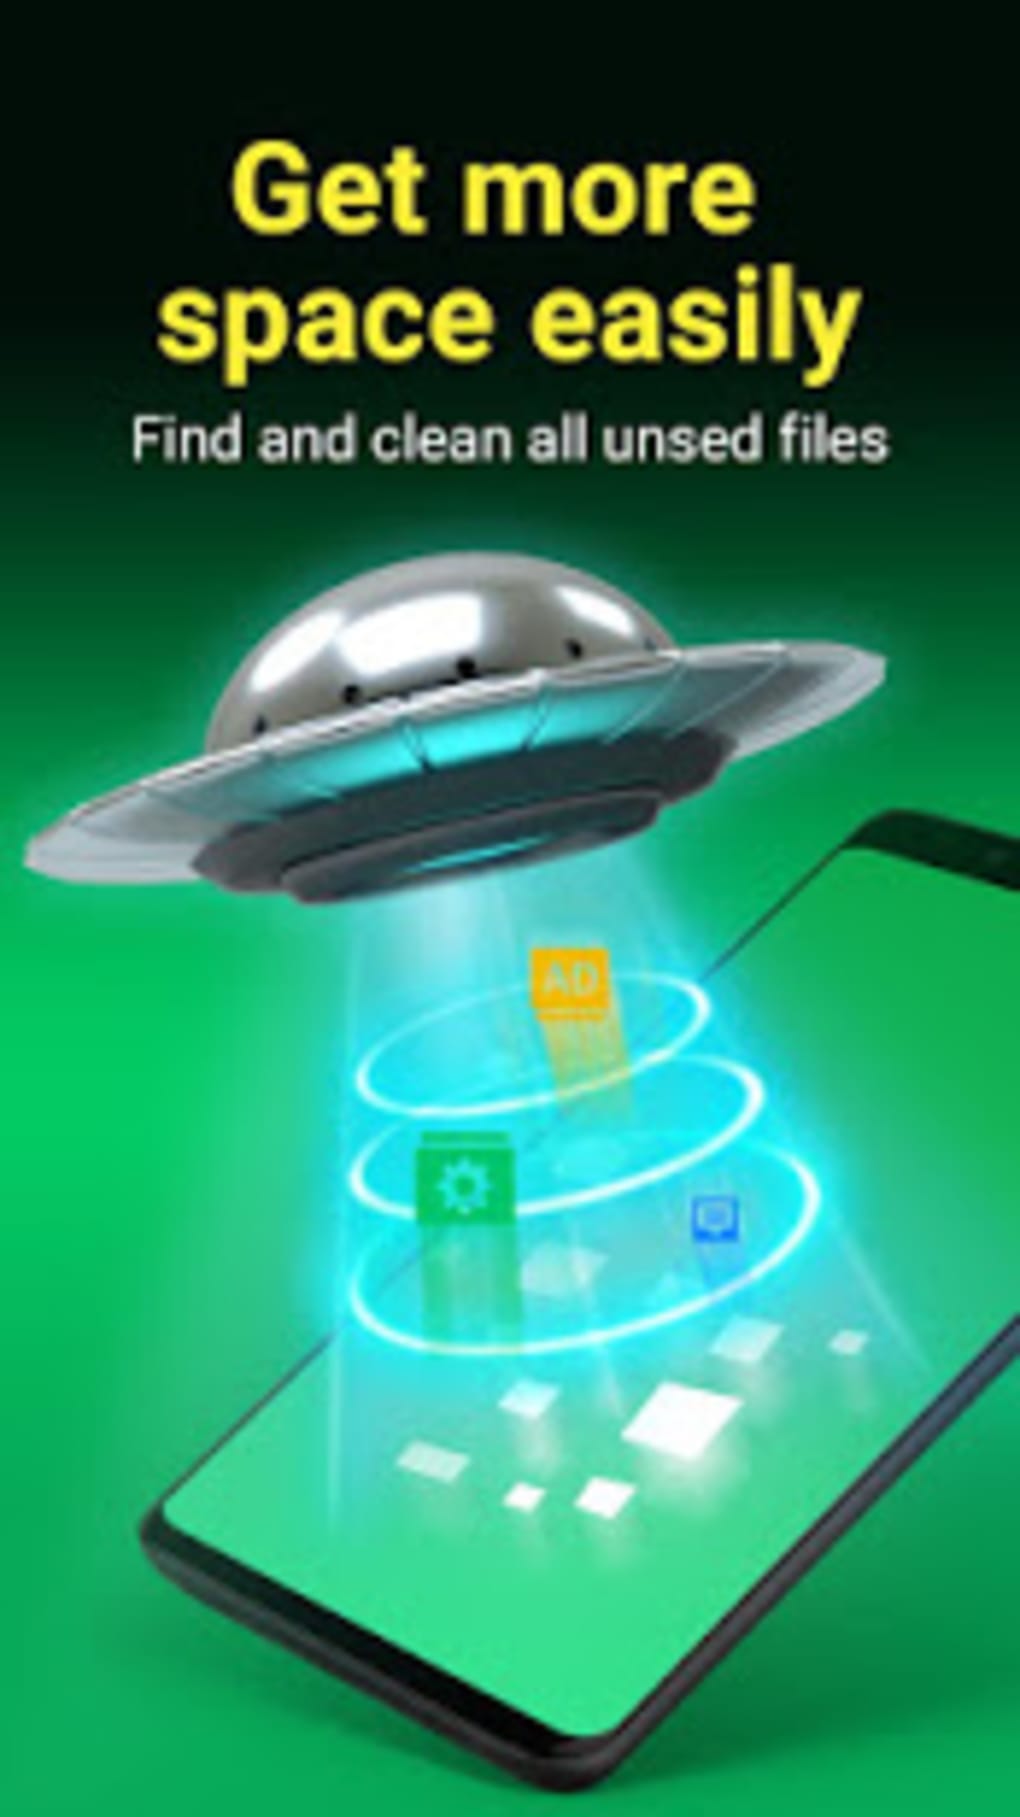 How To Clean Junk Files on Android  Top 6 Junk Cleaner Apps - Techno Sid